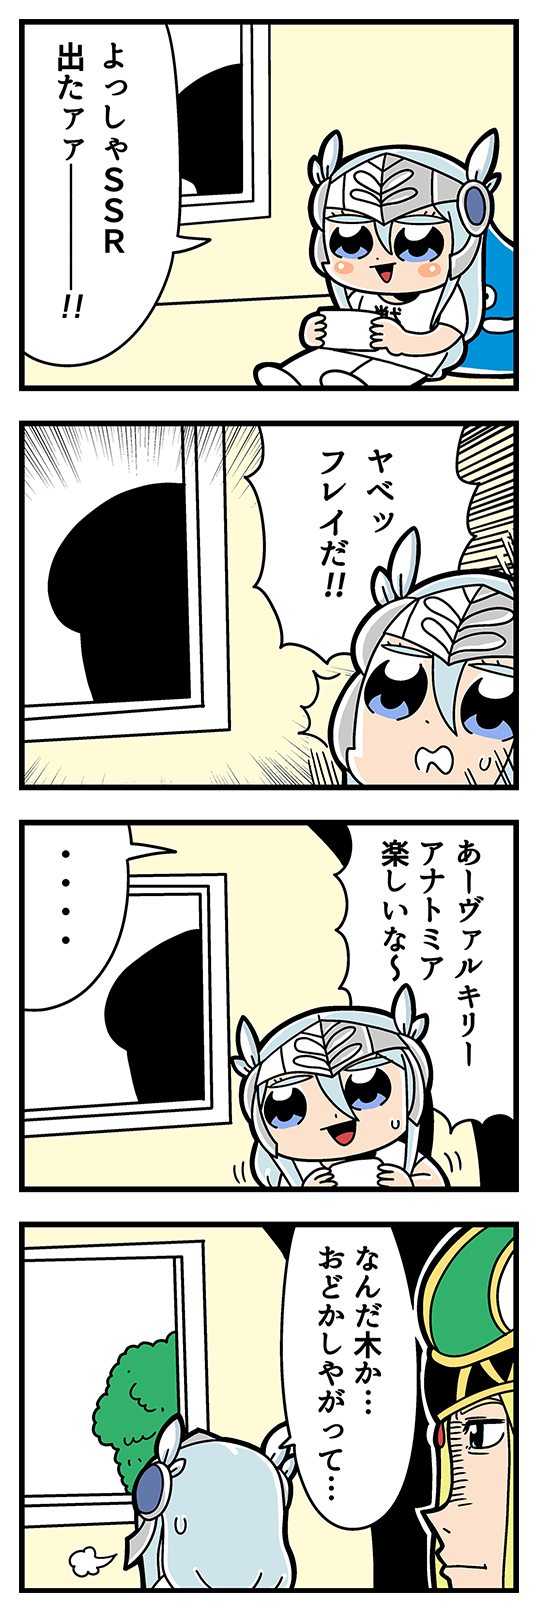 2girls 4koma bkub blonde_hair blue_eyes bush cellphone comic company_connection emphasis_lines freya_(valkyrie_profile) gem green_headwear grey_hair hair_between_eyes hat helmet highres holding holding_phone lenneth_valkyrie long_hair looking_at_phone multiple_girls phone shaded_face shirt silhouette simple_background slime_(dragon_quest) smartphone speech_bubble speed_lines sweatdrop t-shirt talking translation_request two-tone_background valkyrie_profile valkyrie_profile_anatomia window winged_helmet